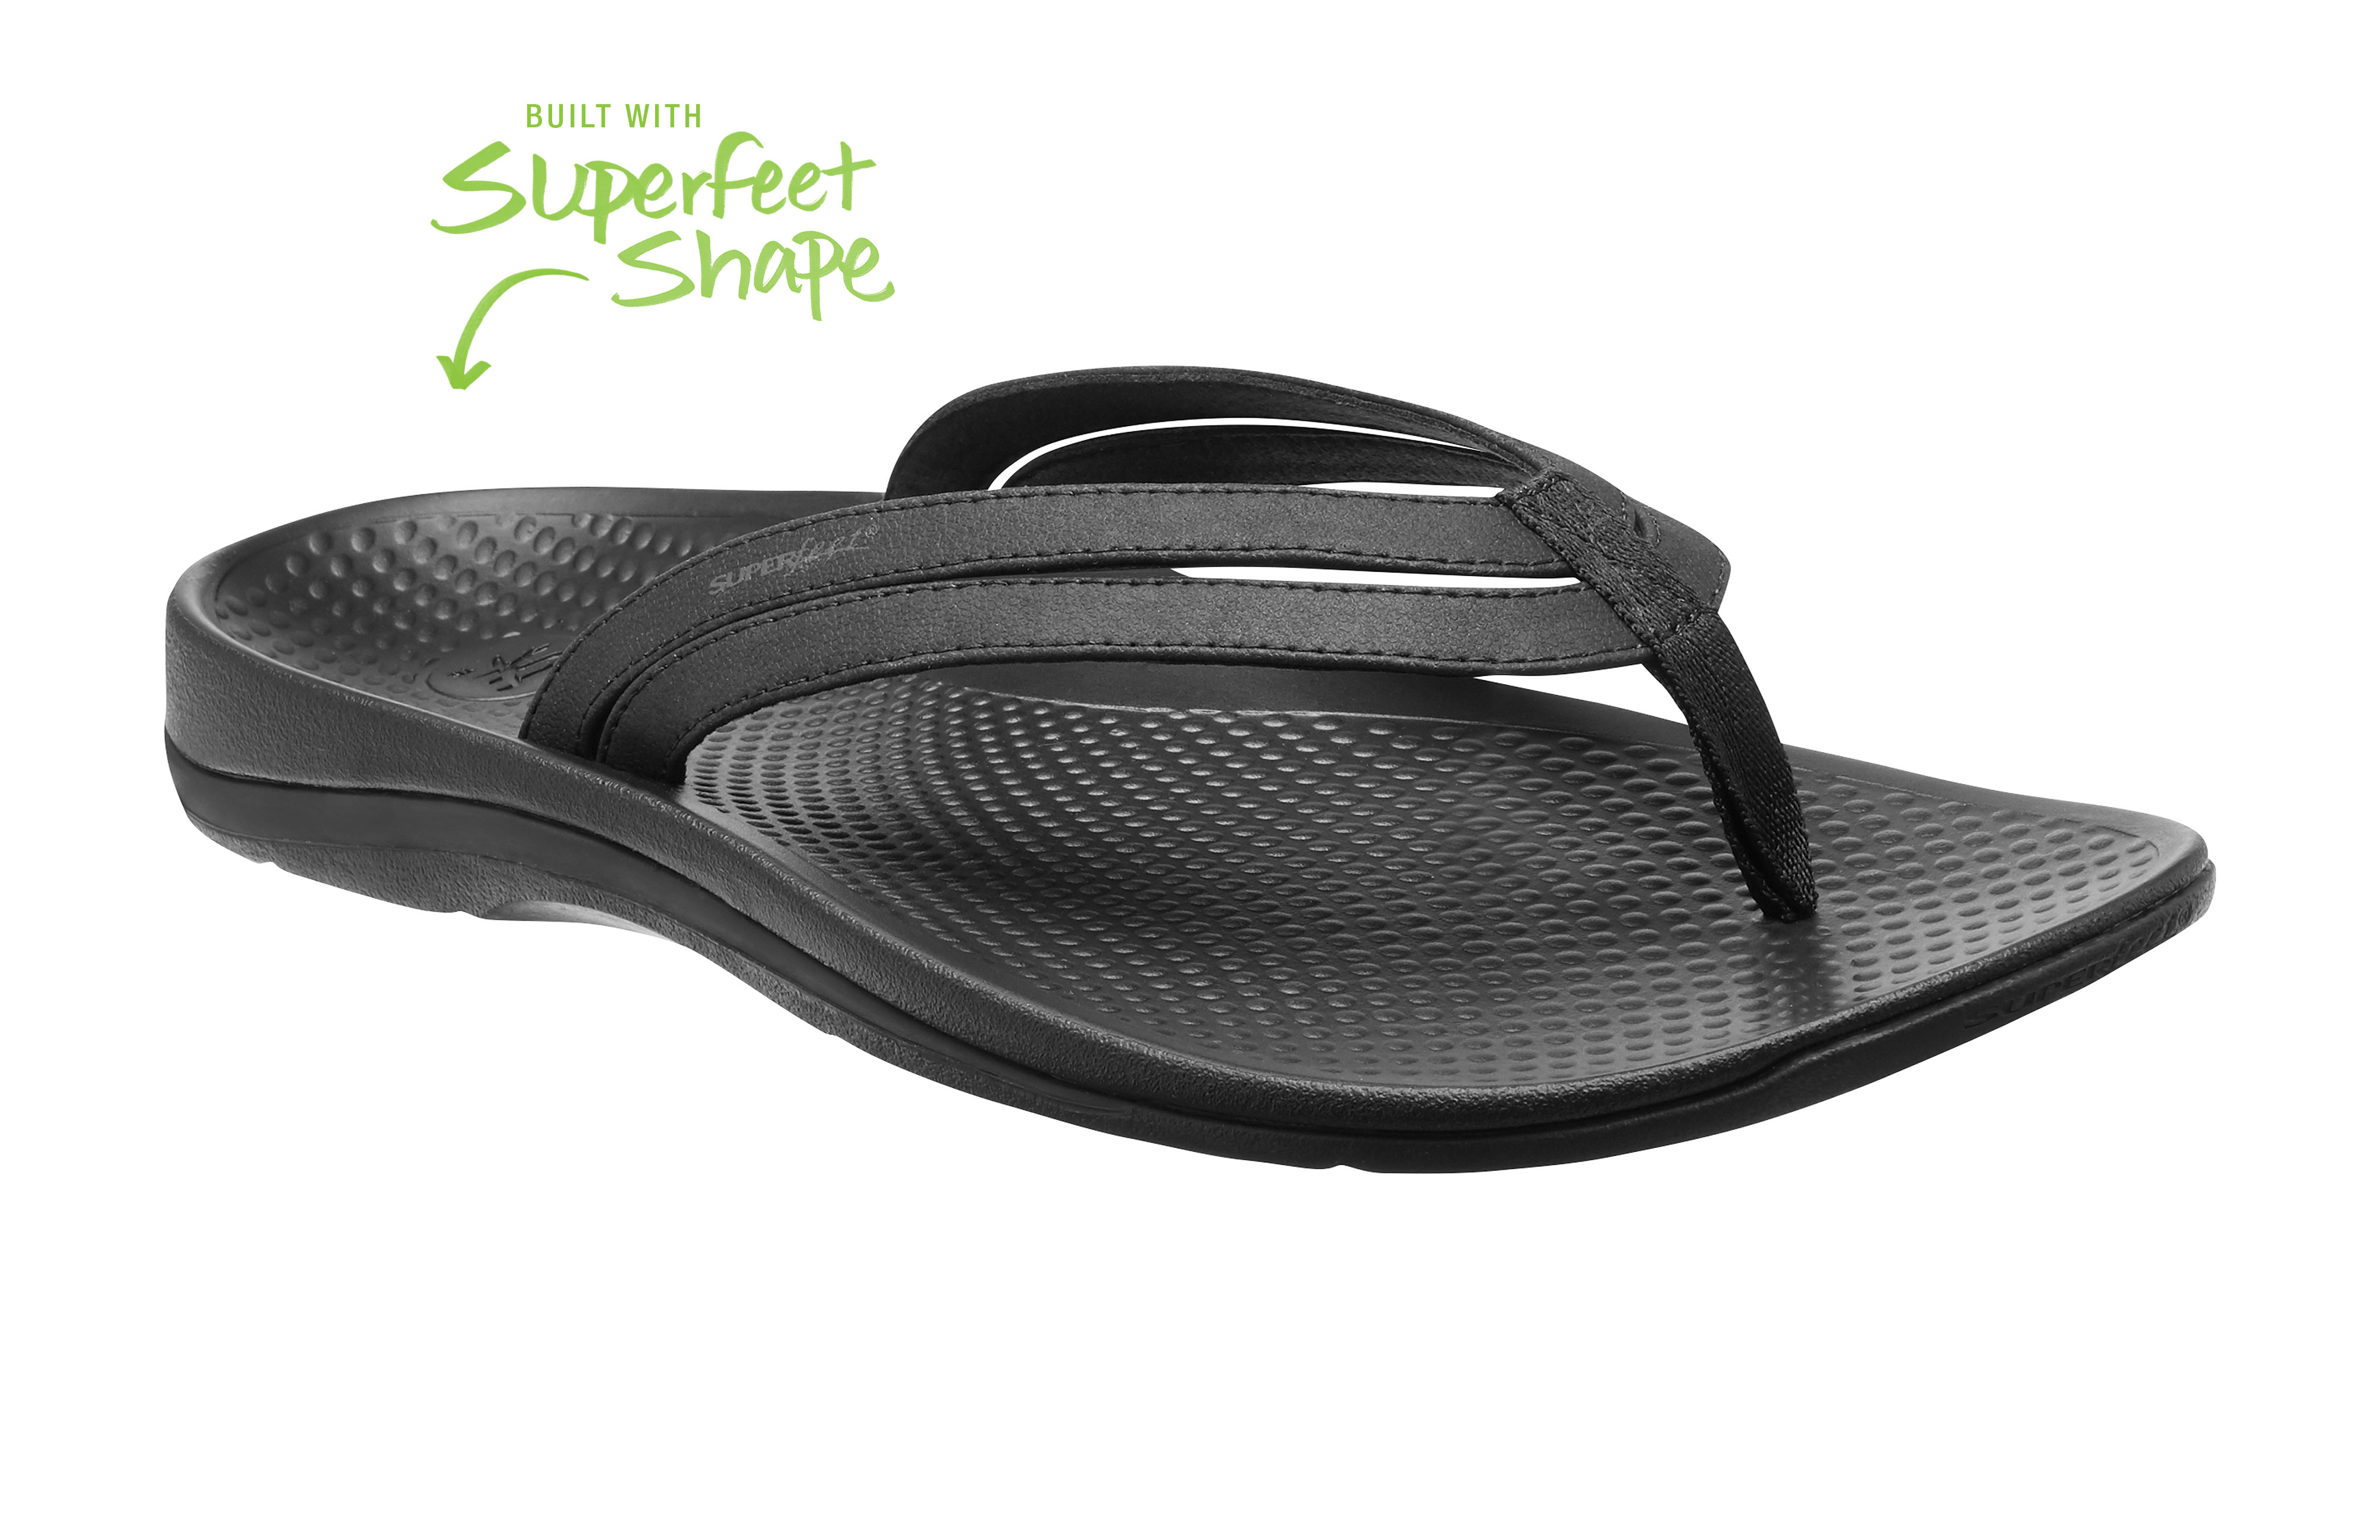 Support, comfort and recovery in Superfeet sandals